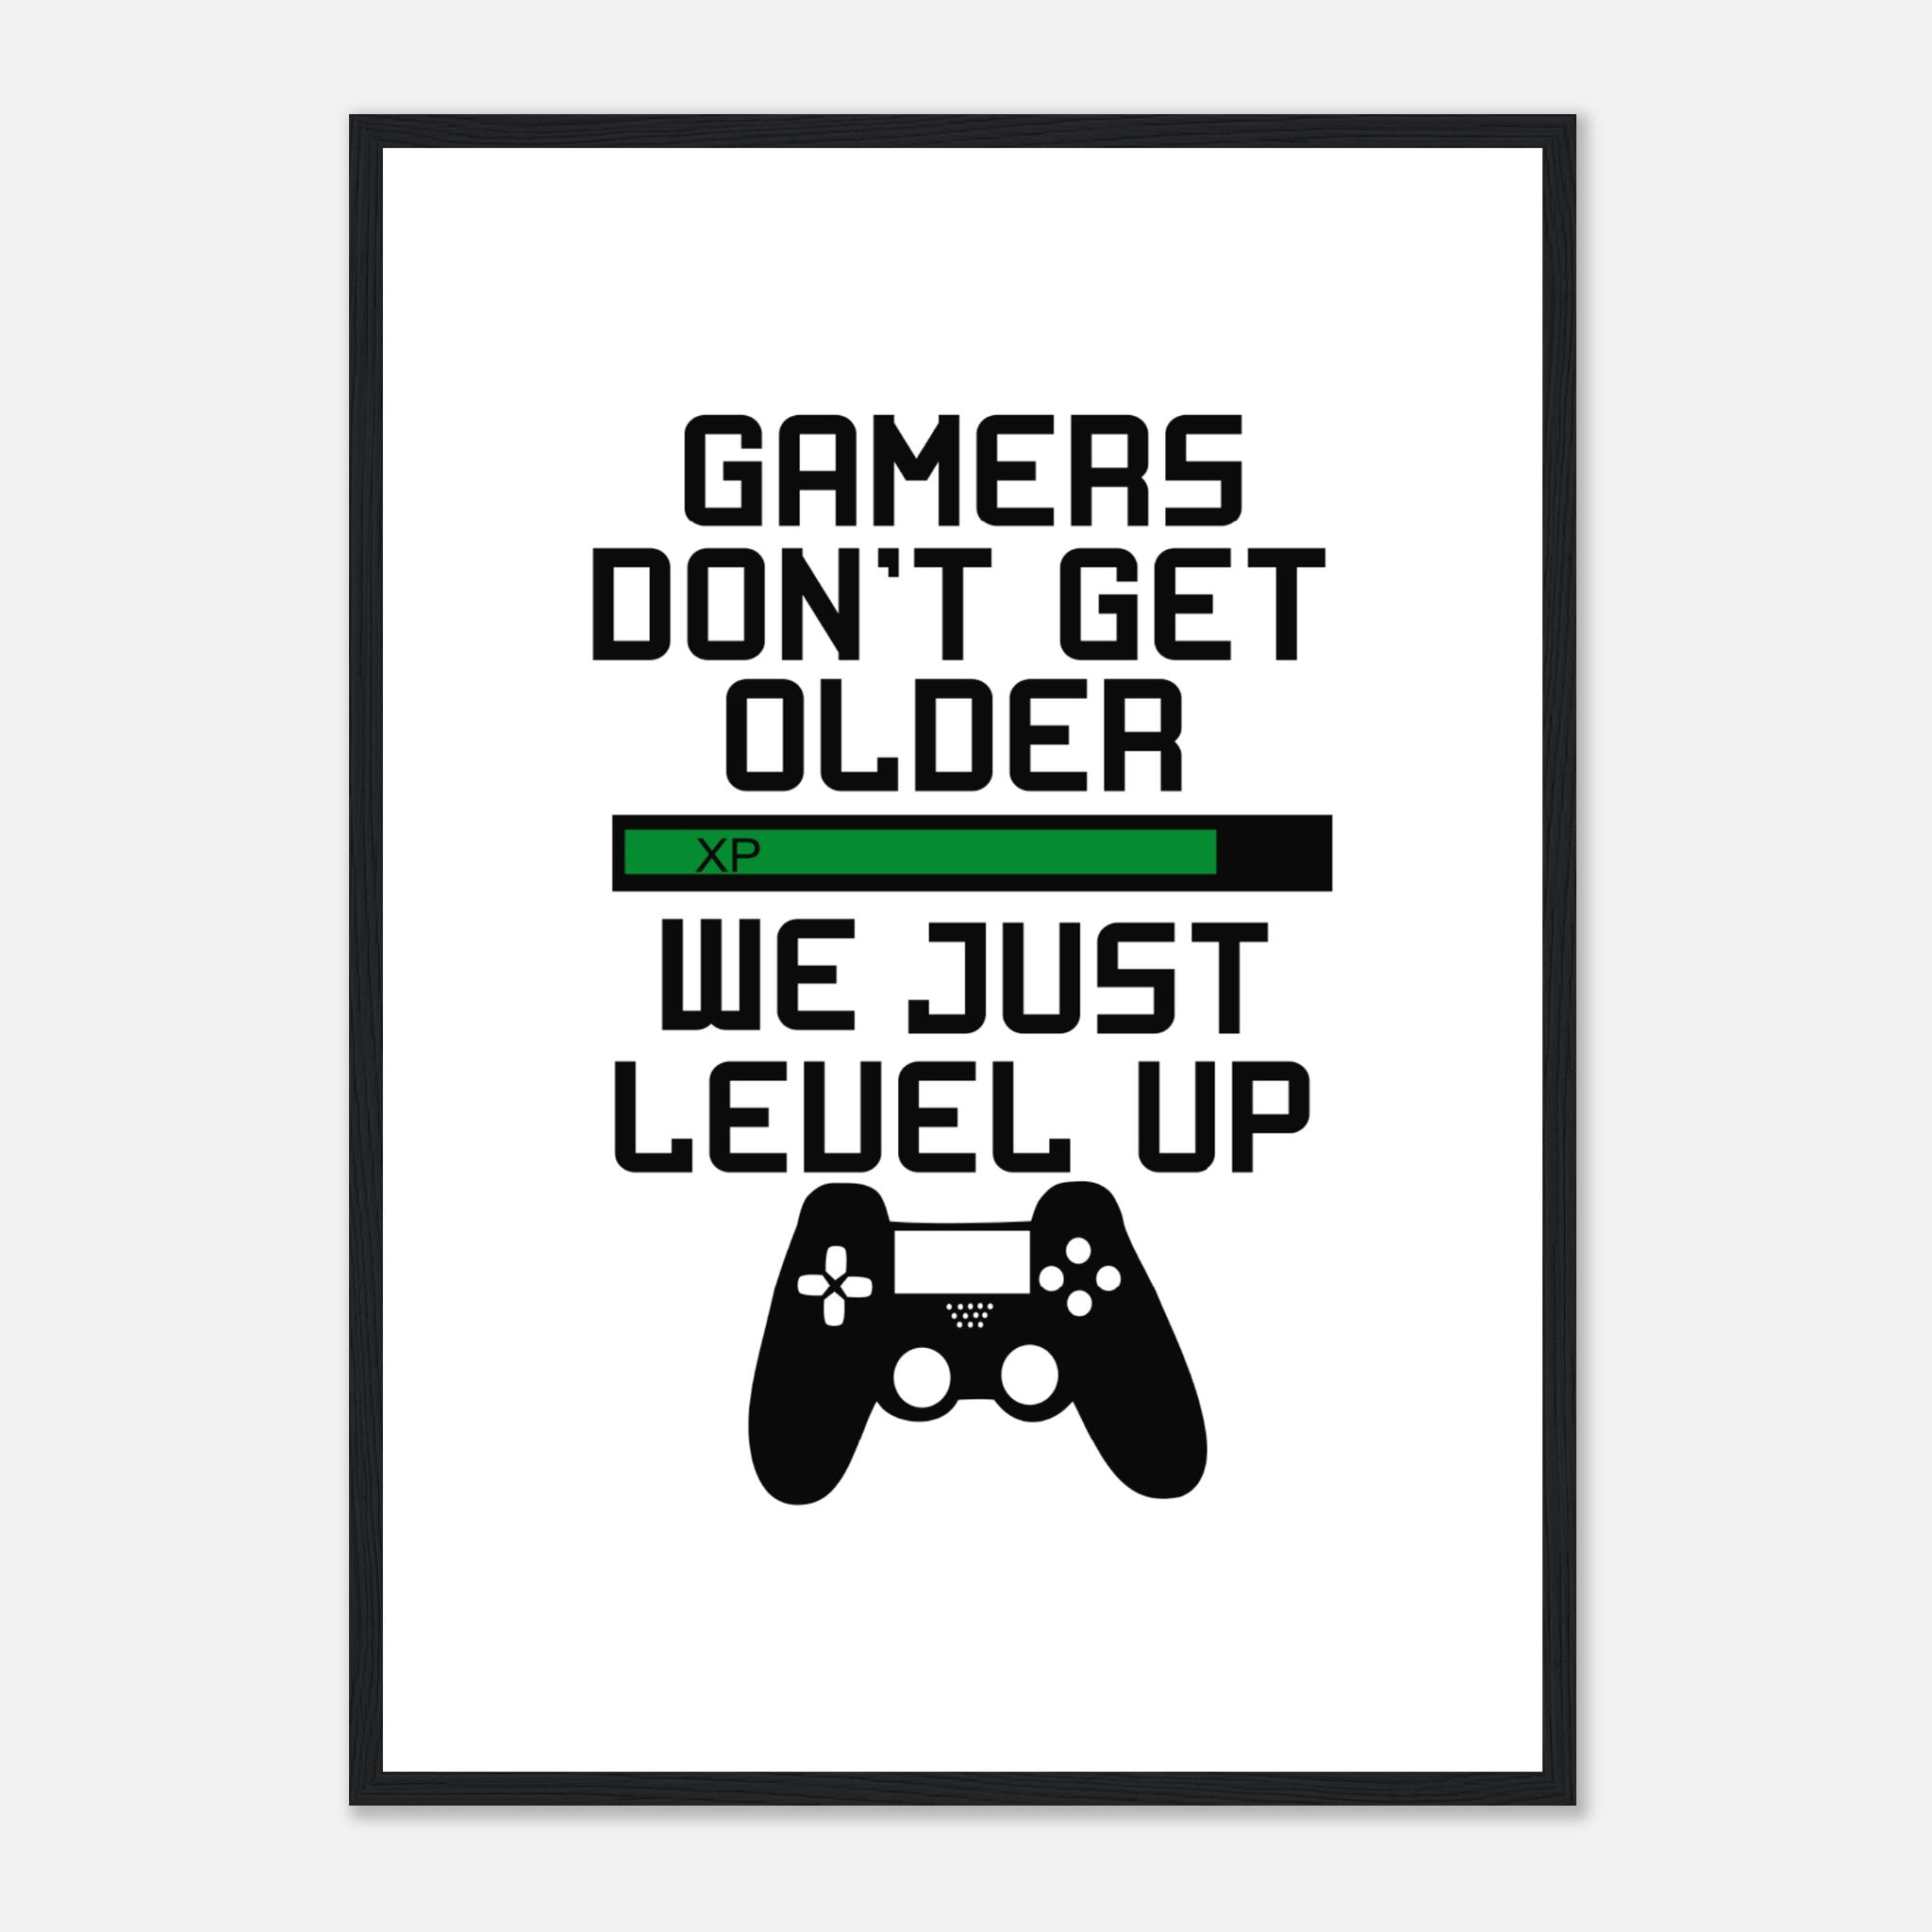 Funny Slogan for Gamers Poster Poster